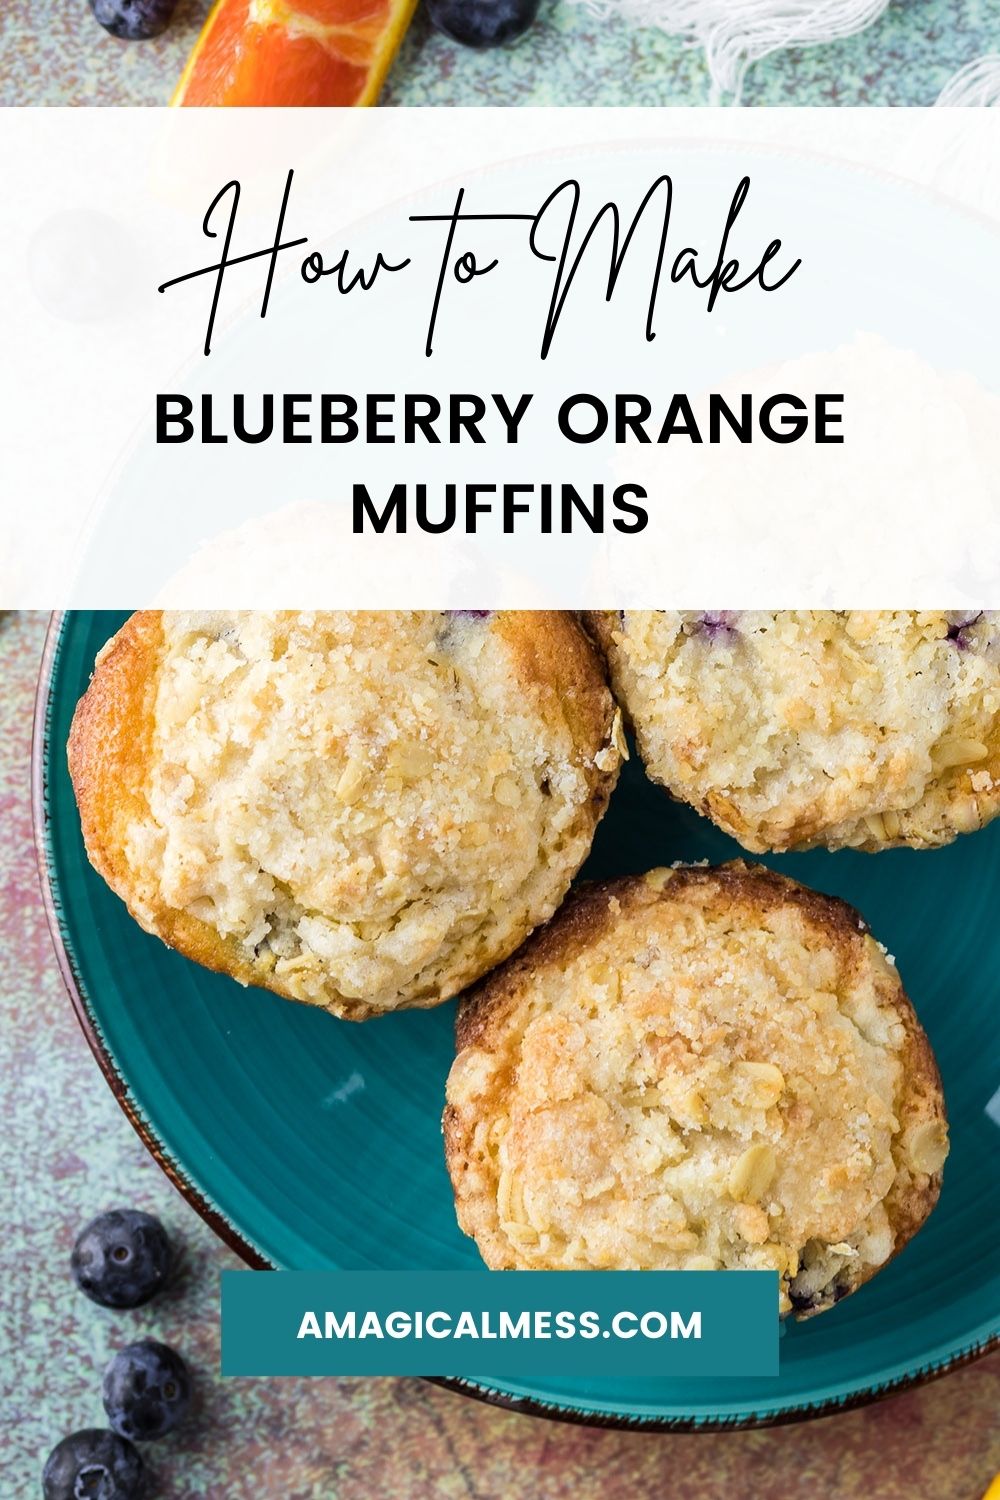 Three muffins on a blue plate.